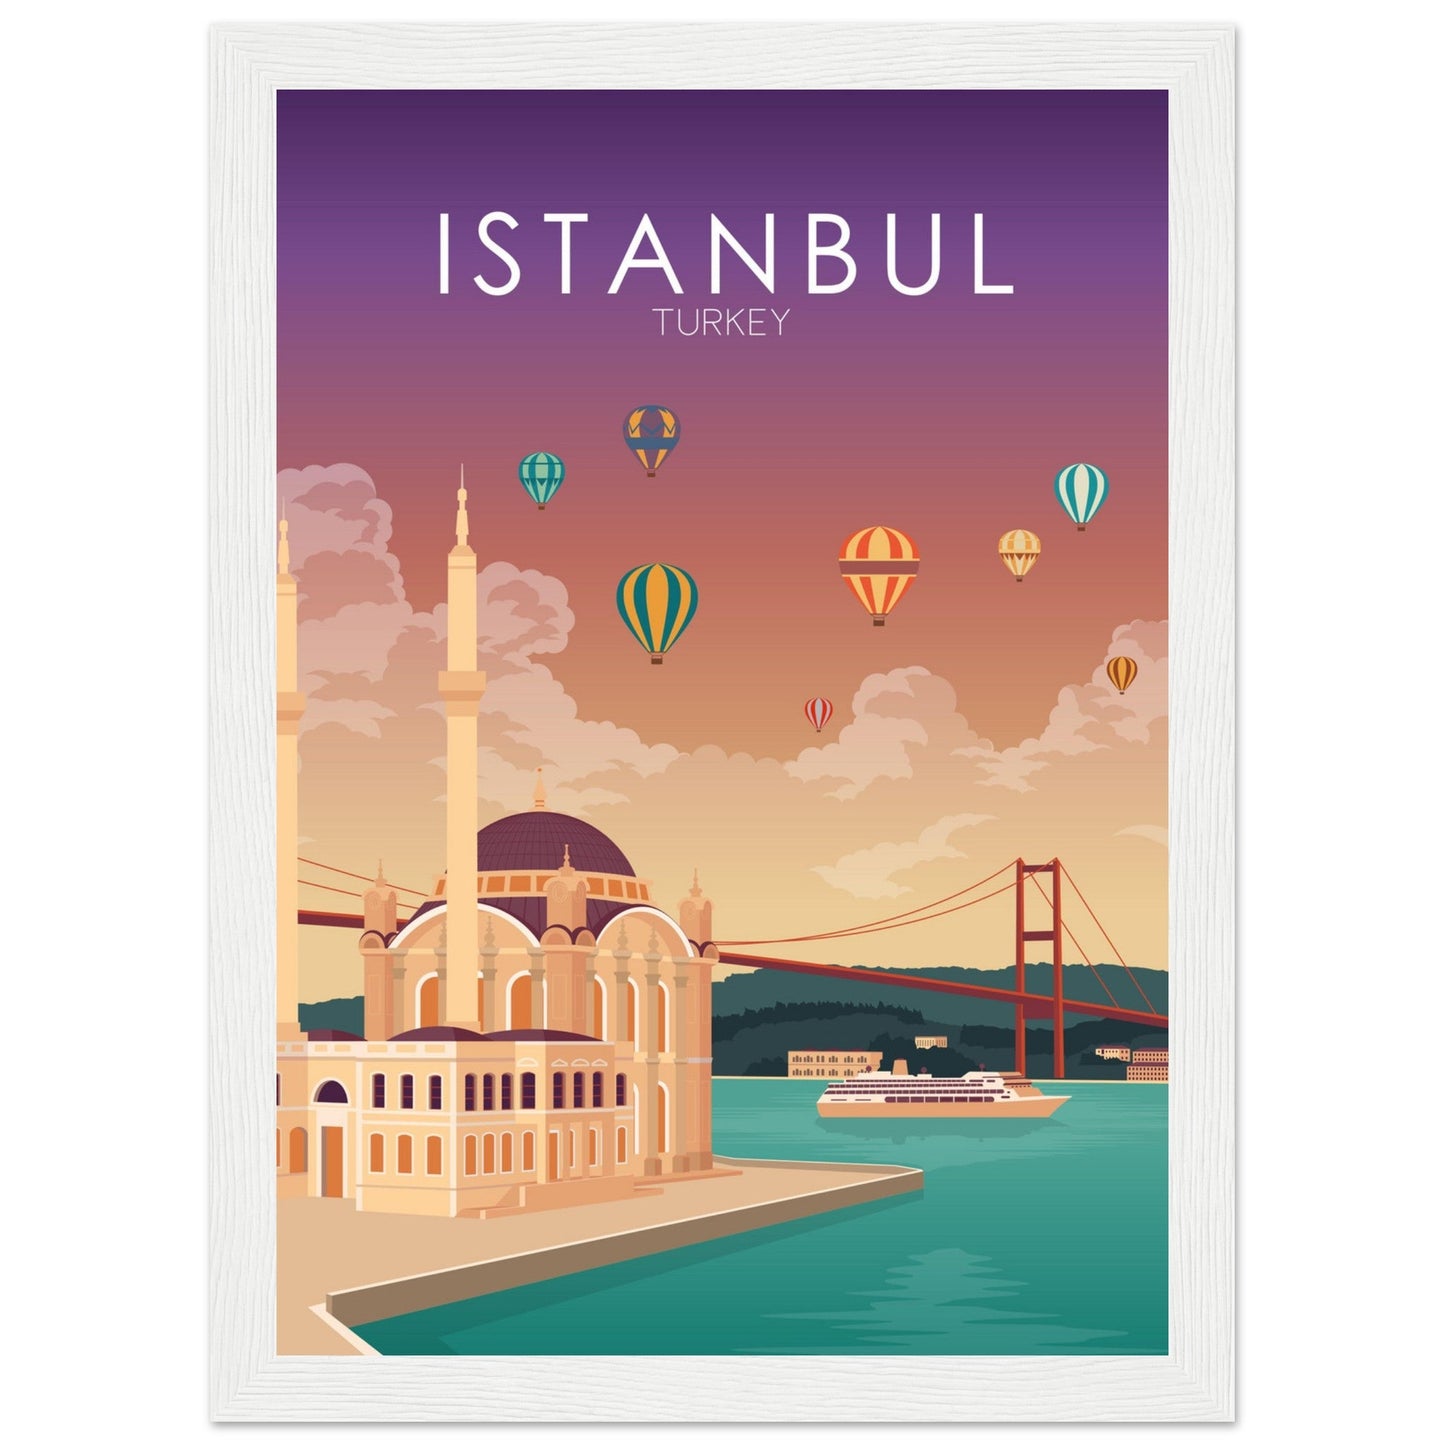 Istanbul Poster | Istanbul Wall Art | Istanbul Sunset Print